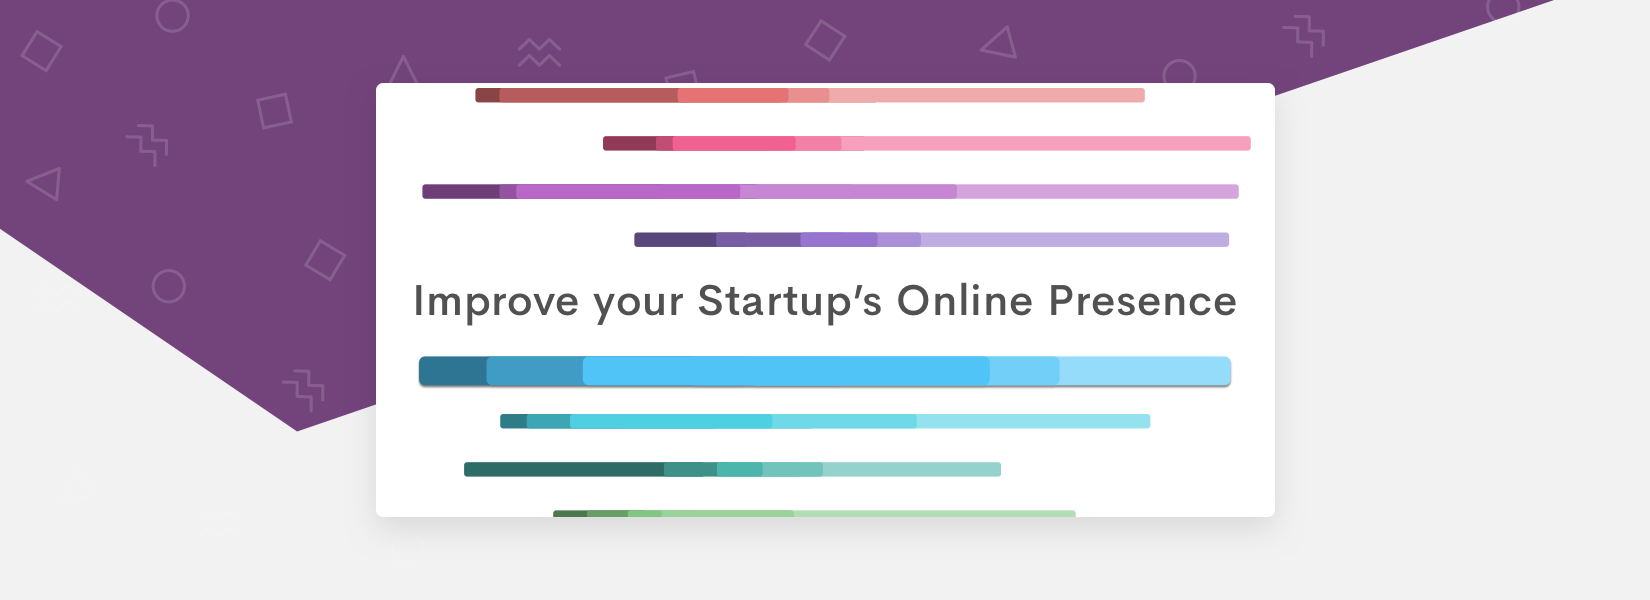 Give your startup the online presence it deserves